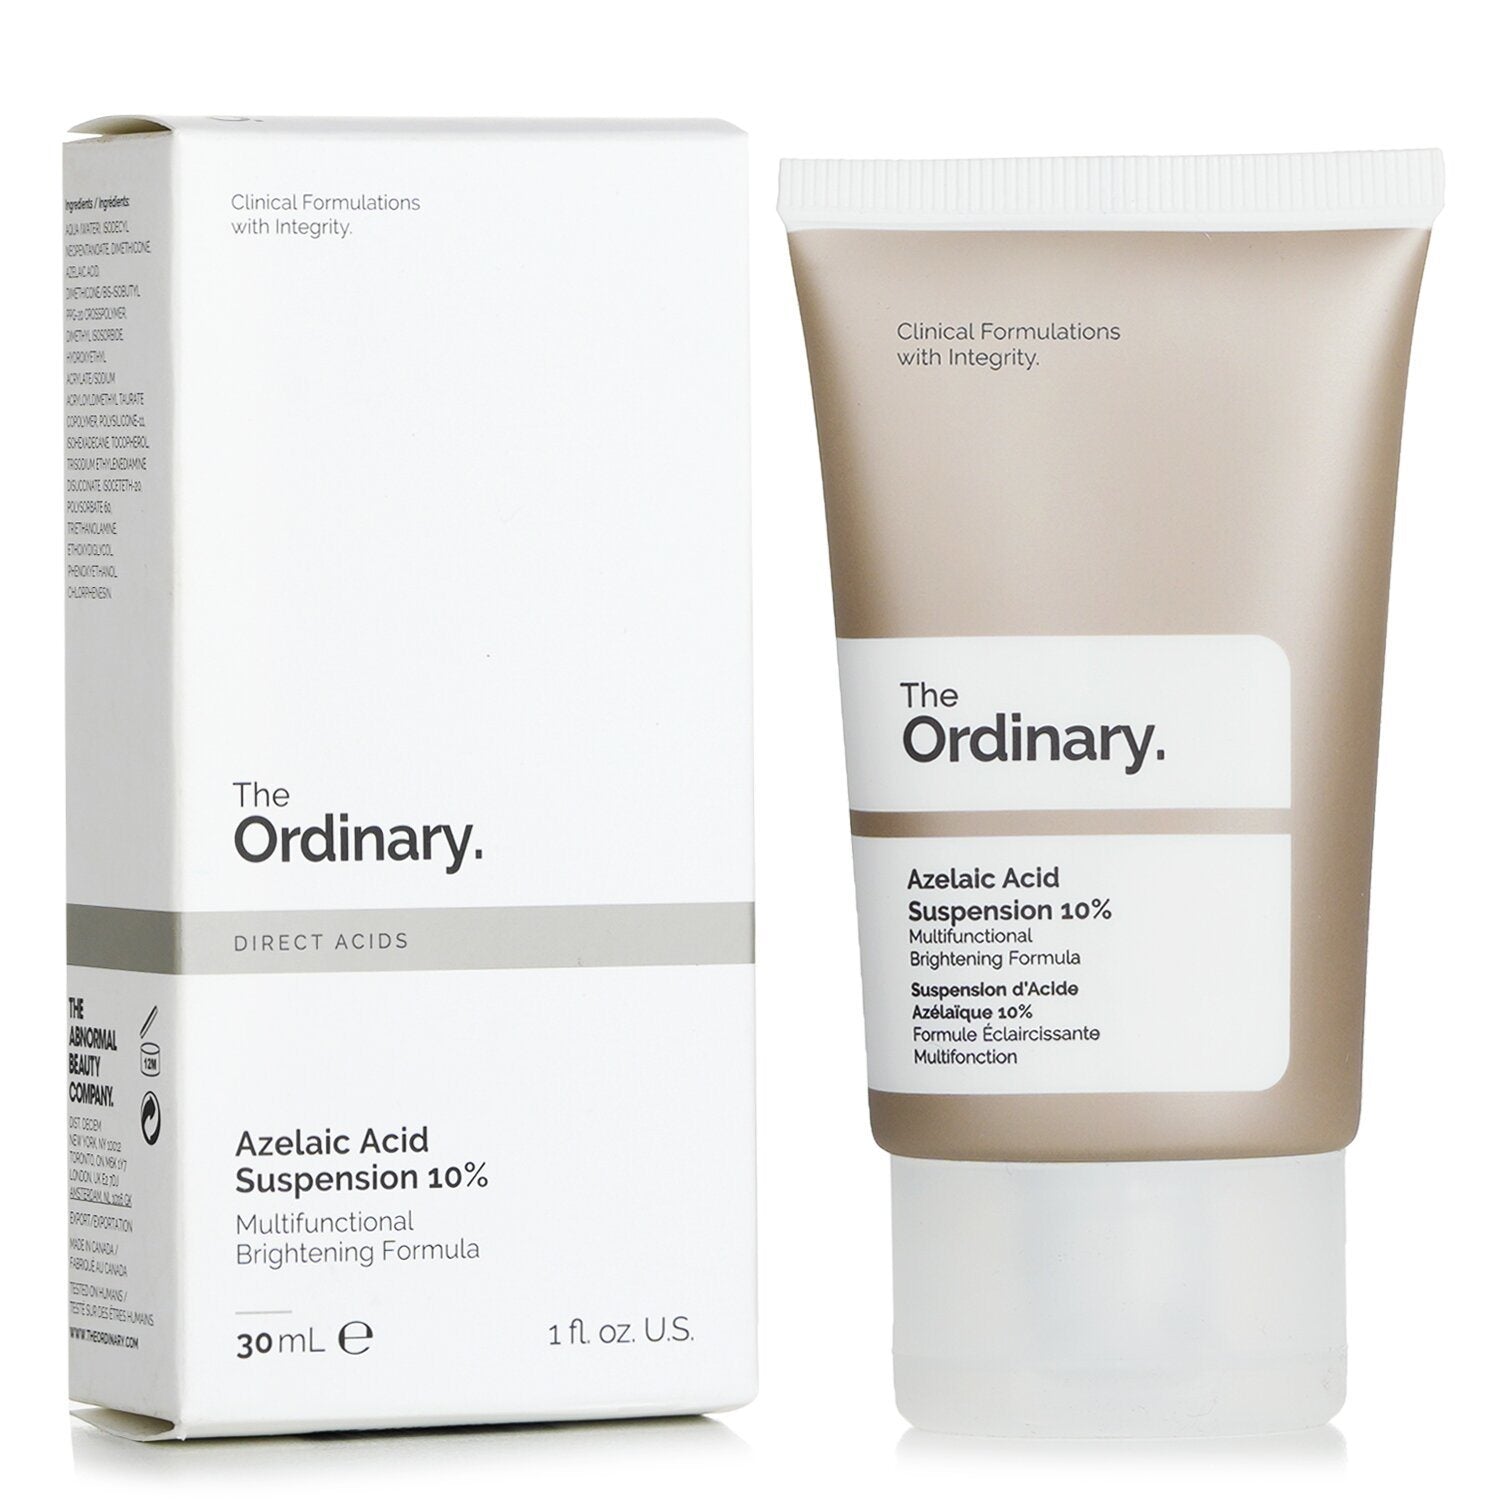 The Ordinary - Azelaic Acid Suspension 10% 190588 30ml/1oz is a brightening solution for uneven and blemish-prone skin.